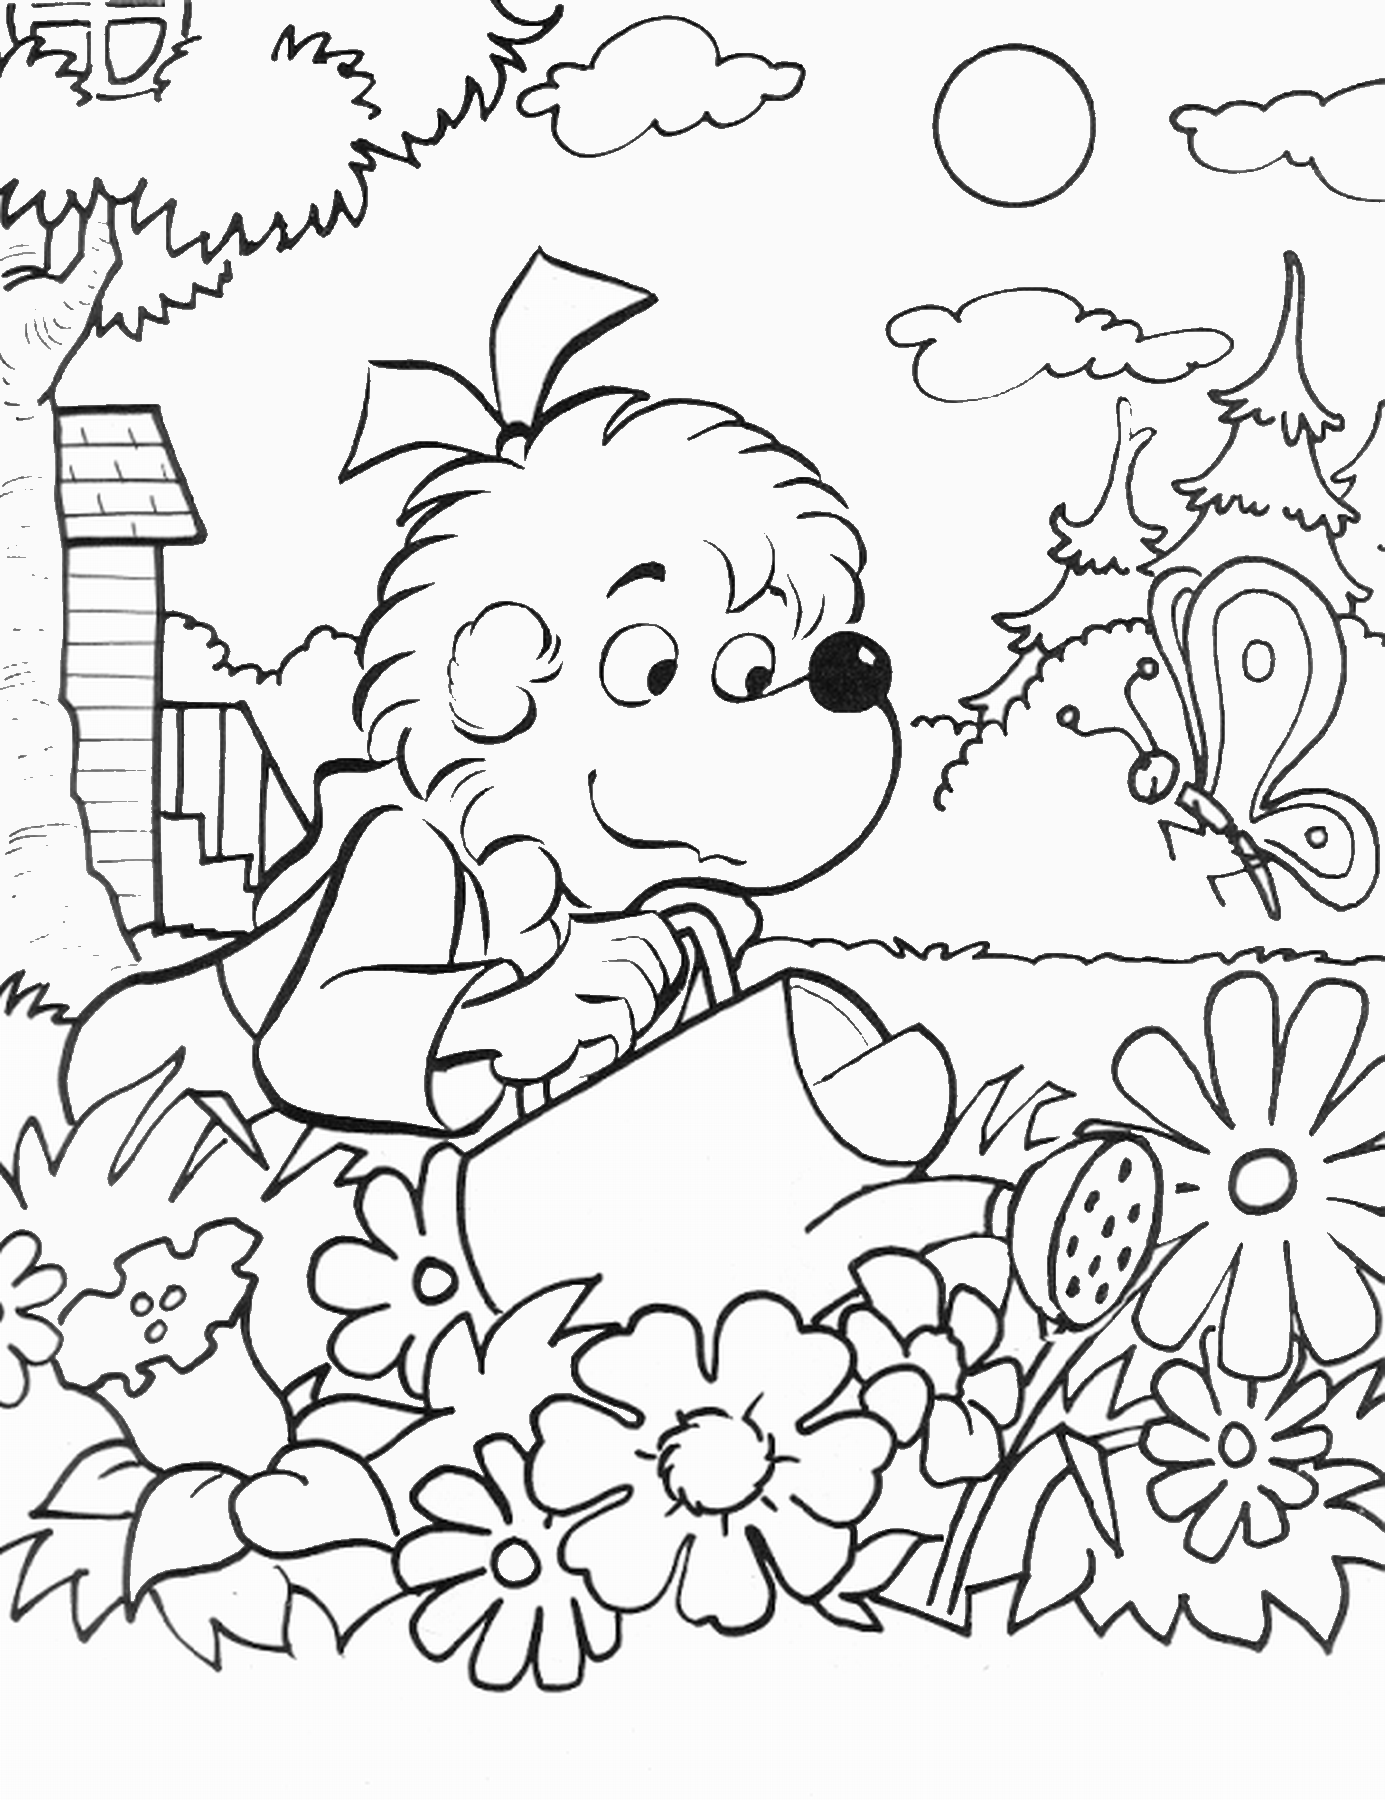 Printable Flower Coloring Pages Flowers Nature flowerc55 Printable 2021 384 Coloring4free